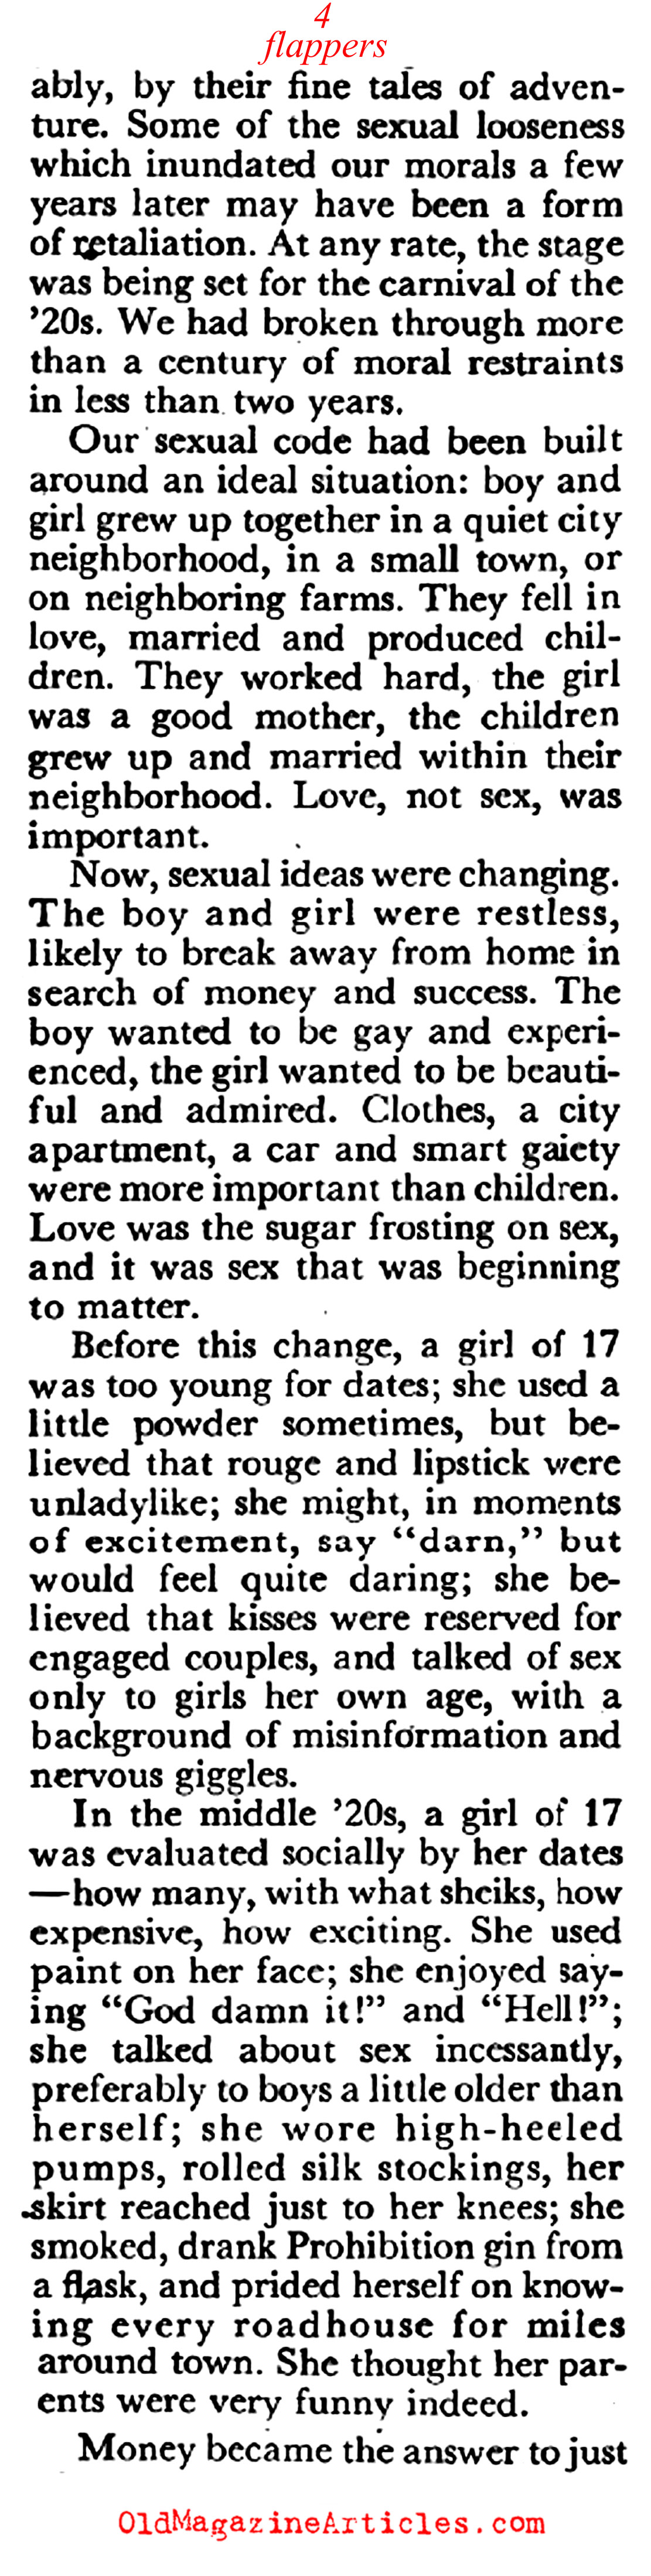 Flappers Altered the Sexual Contract in Society (Coronet Magazine, 1955)